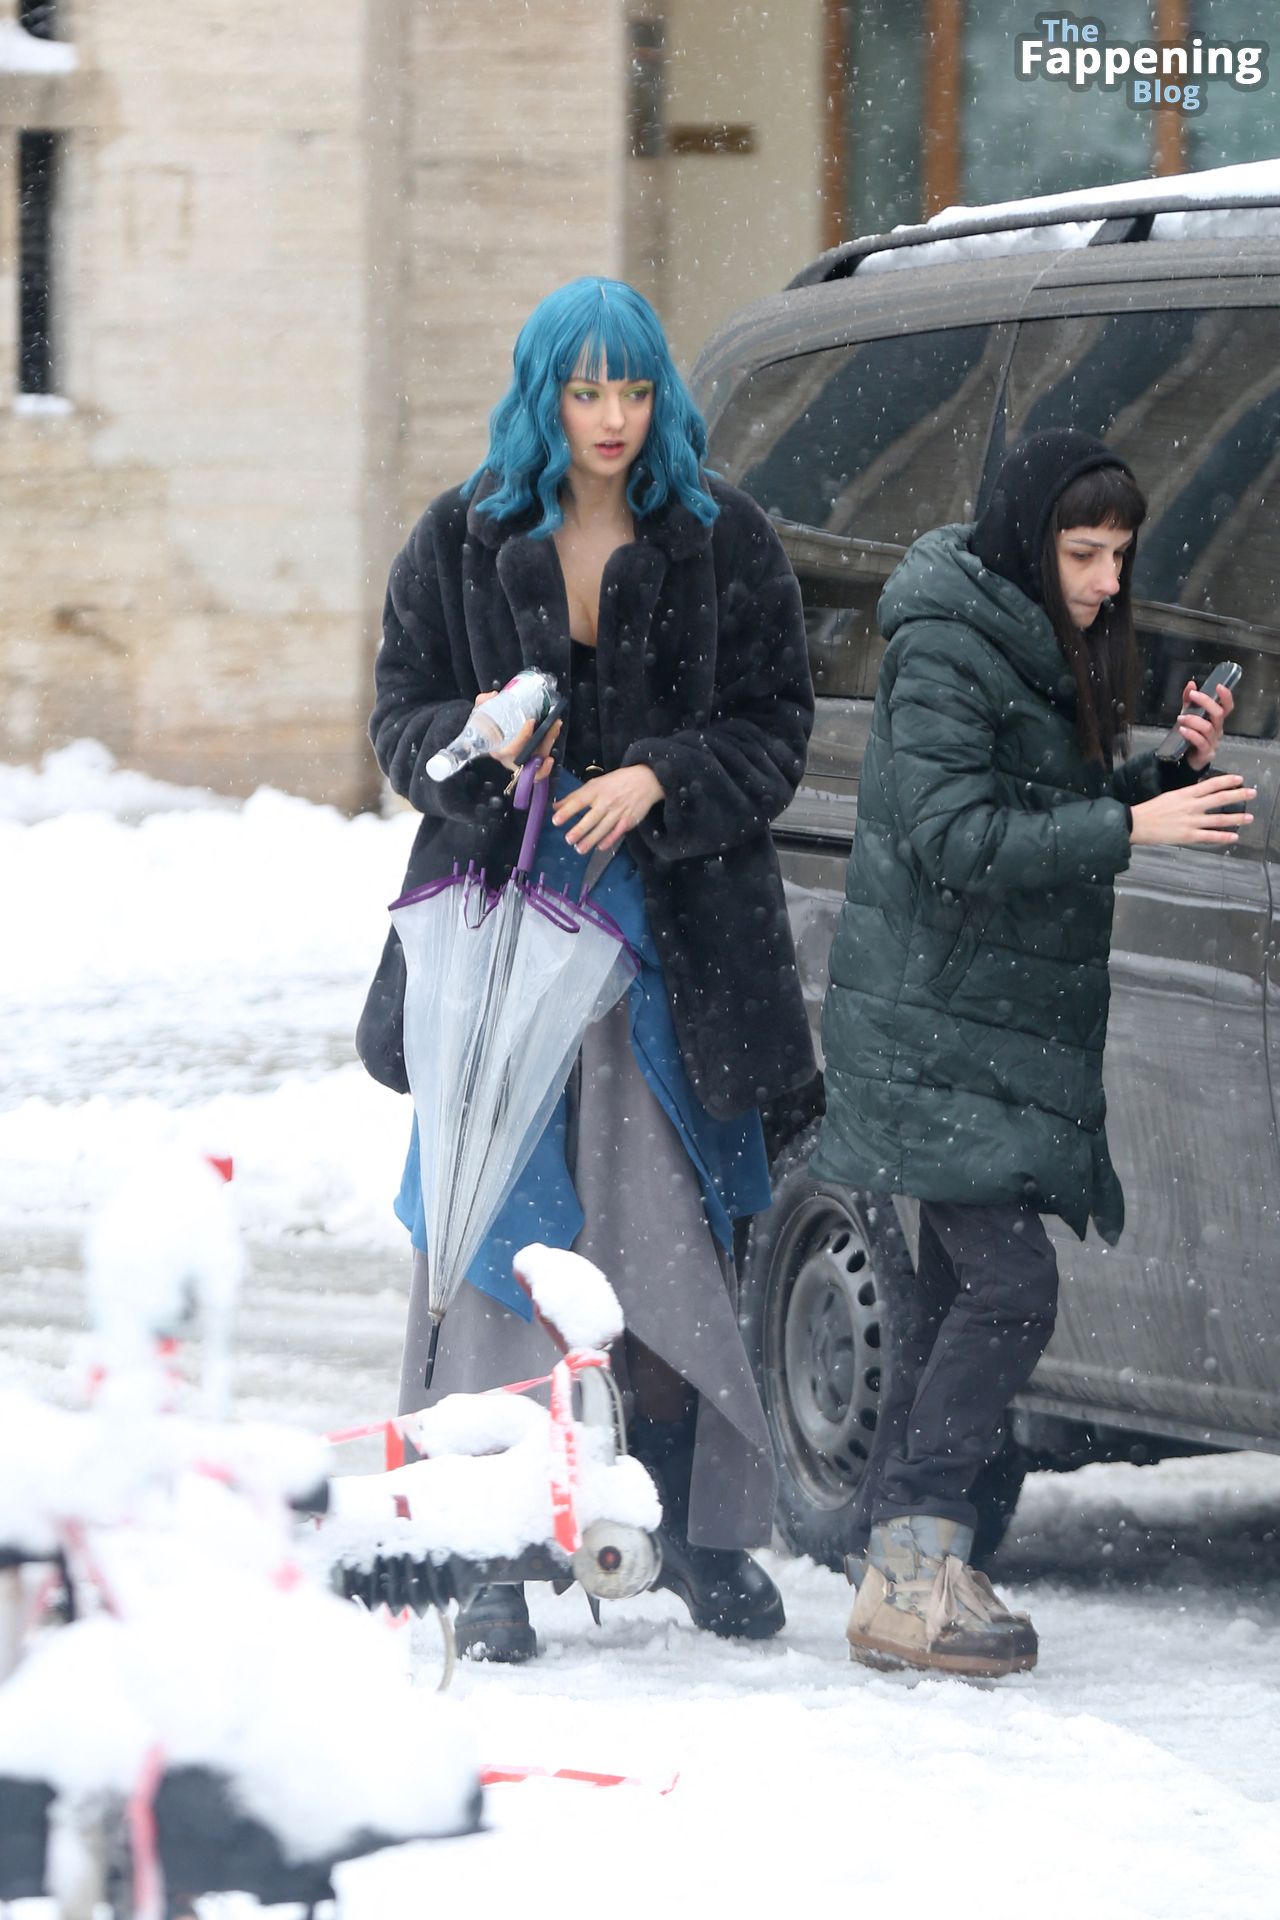 Lilly Krug is Seen at the Base Camp of the “April X” Movie Set (13 Photos)